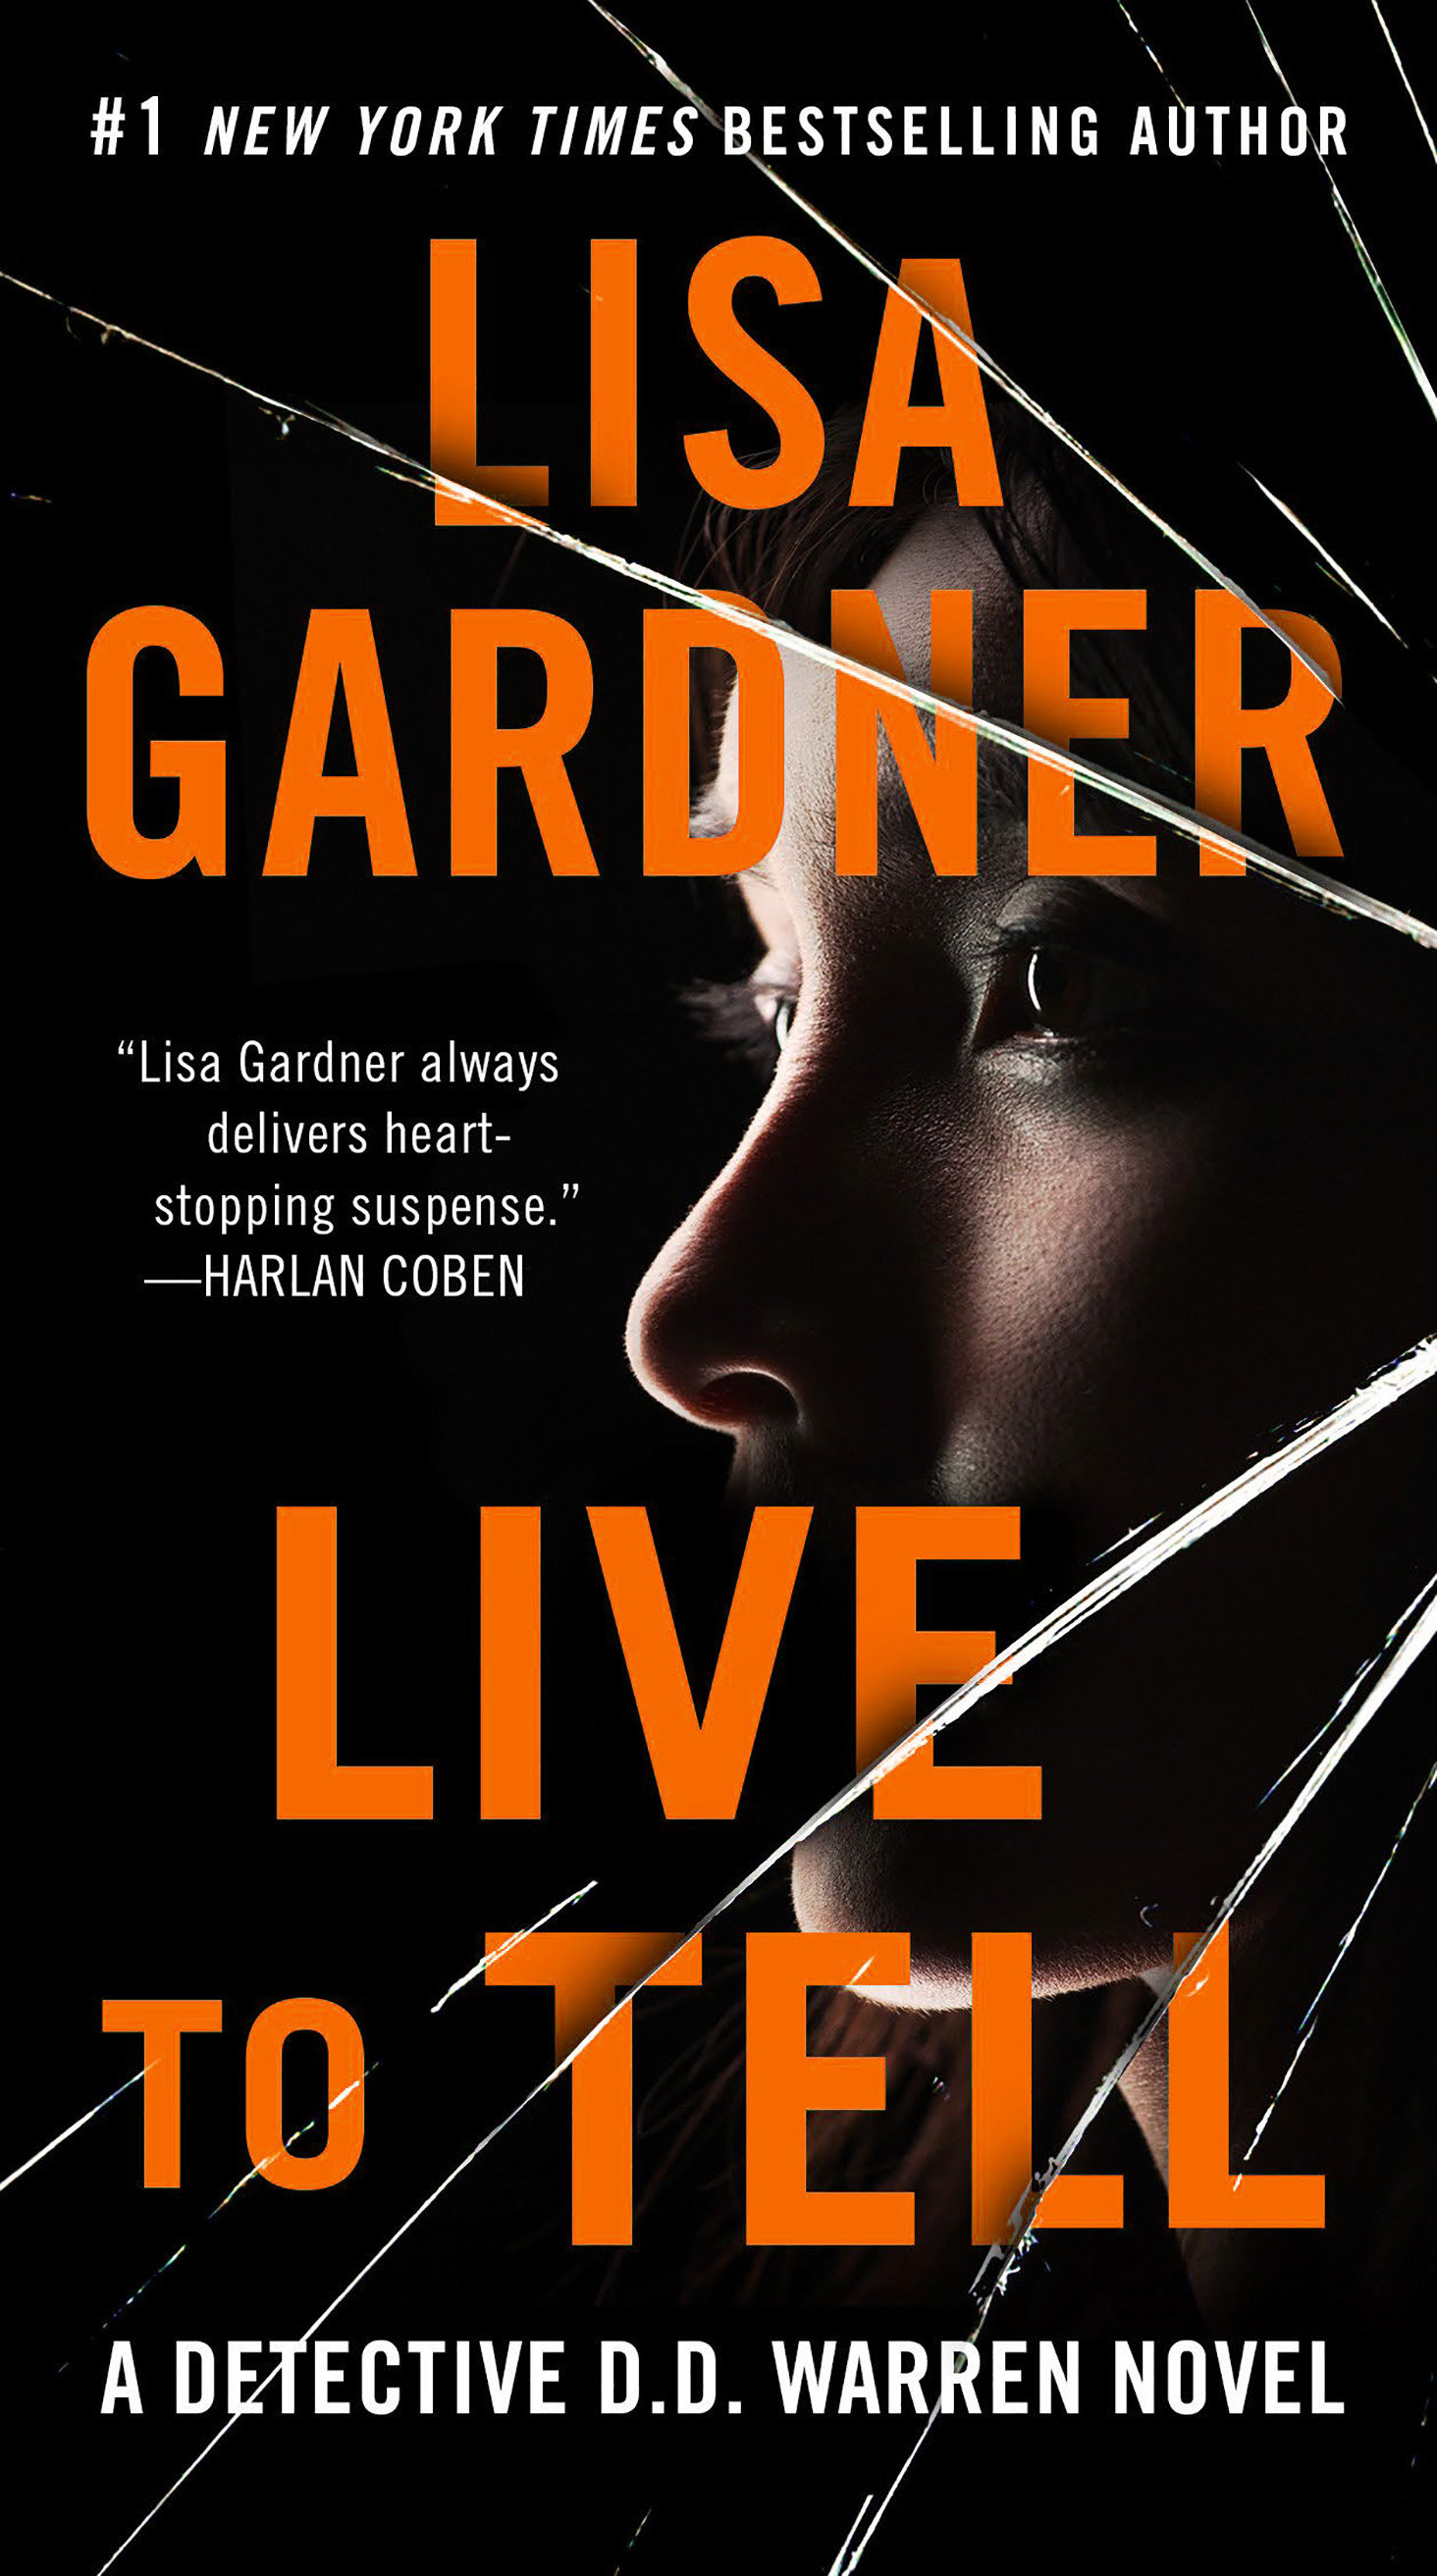 Live to tell cover image